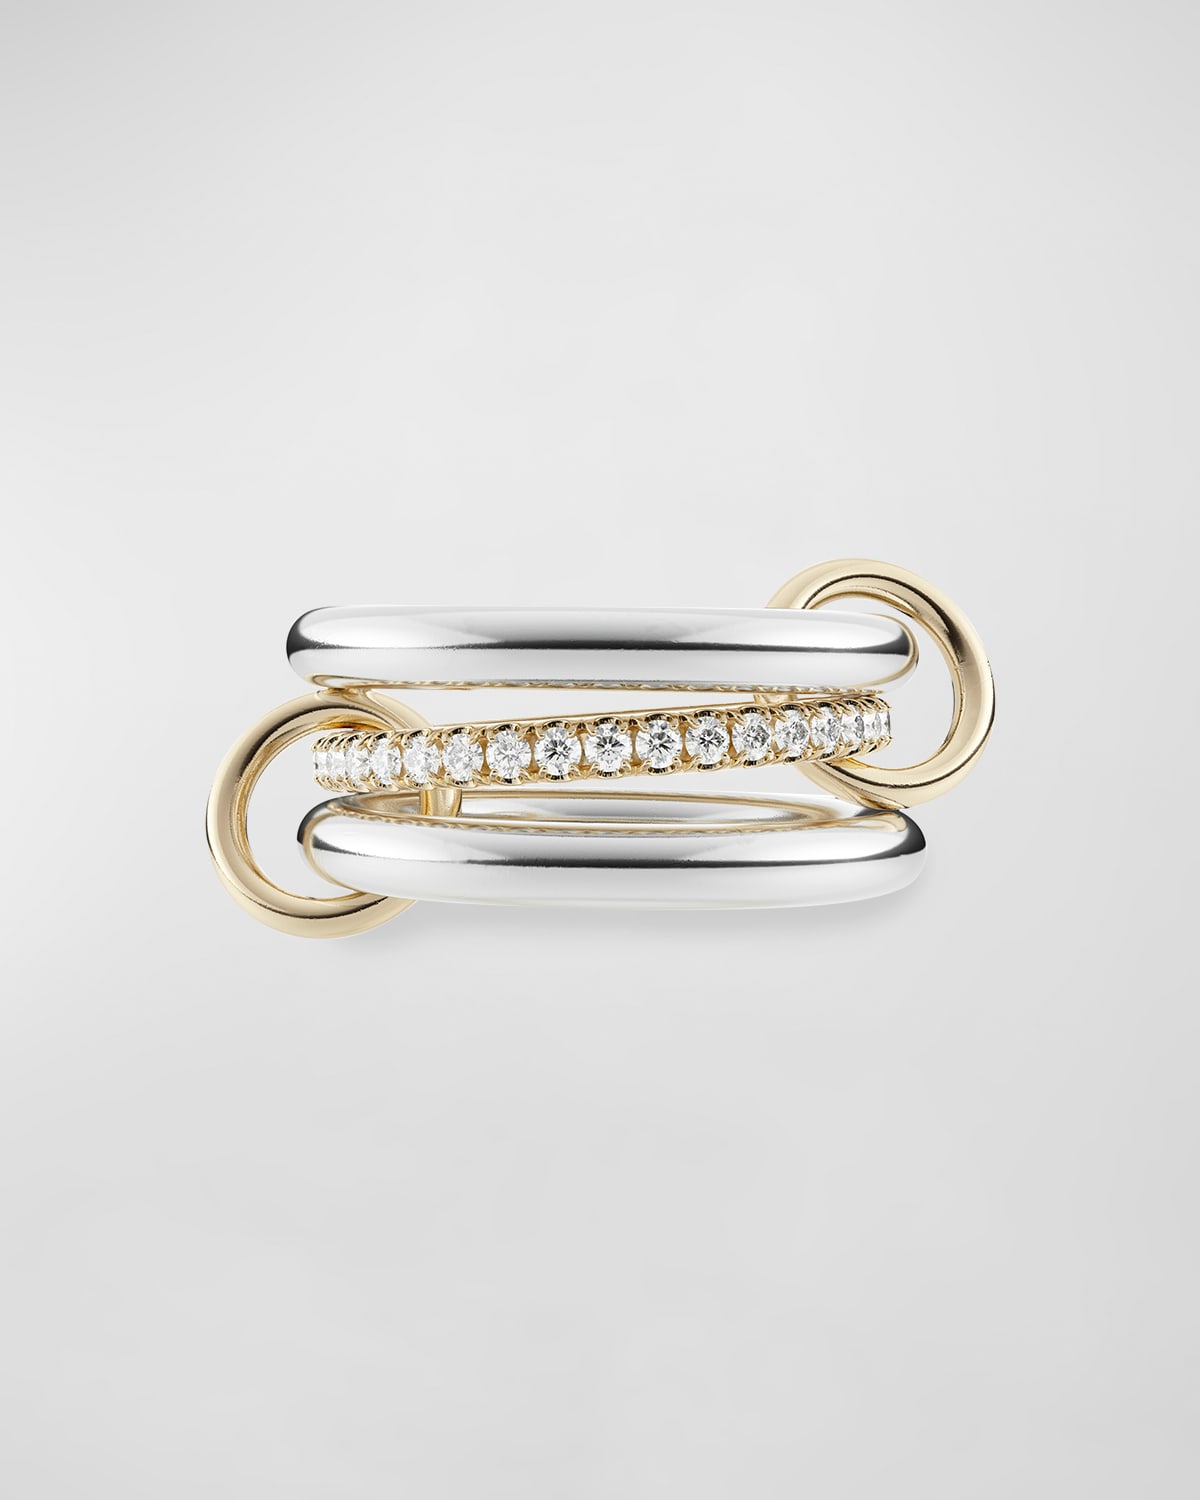 Libra SG Petite 3-Link Ring in Sterling Silver, 18K Yellow Gold and Diamonds, Size 4.5